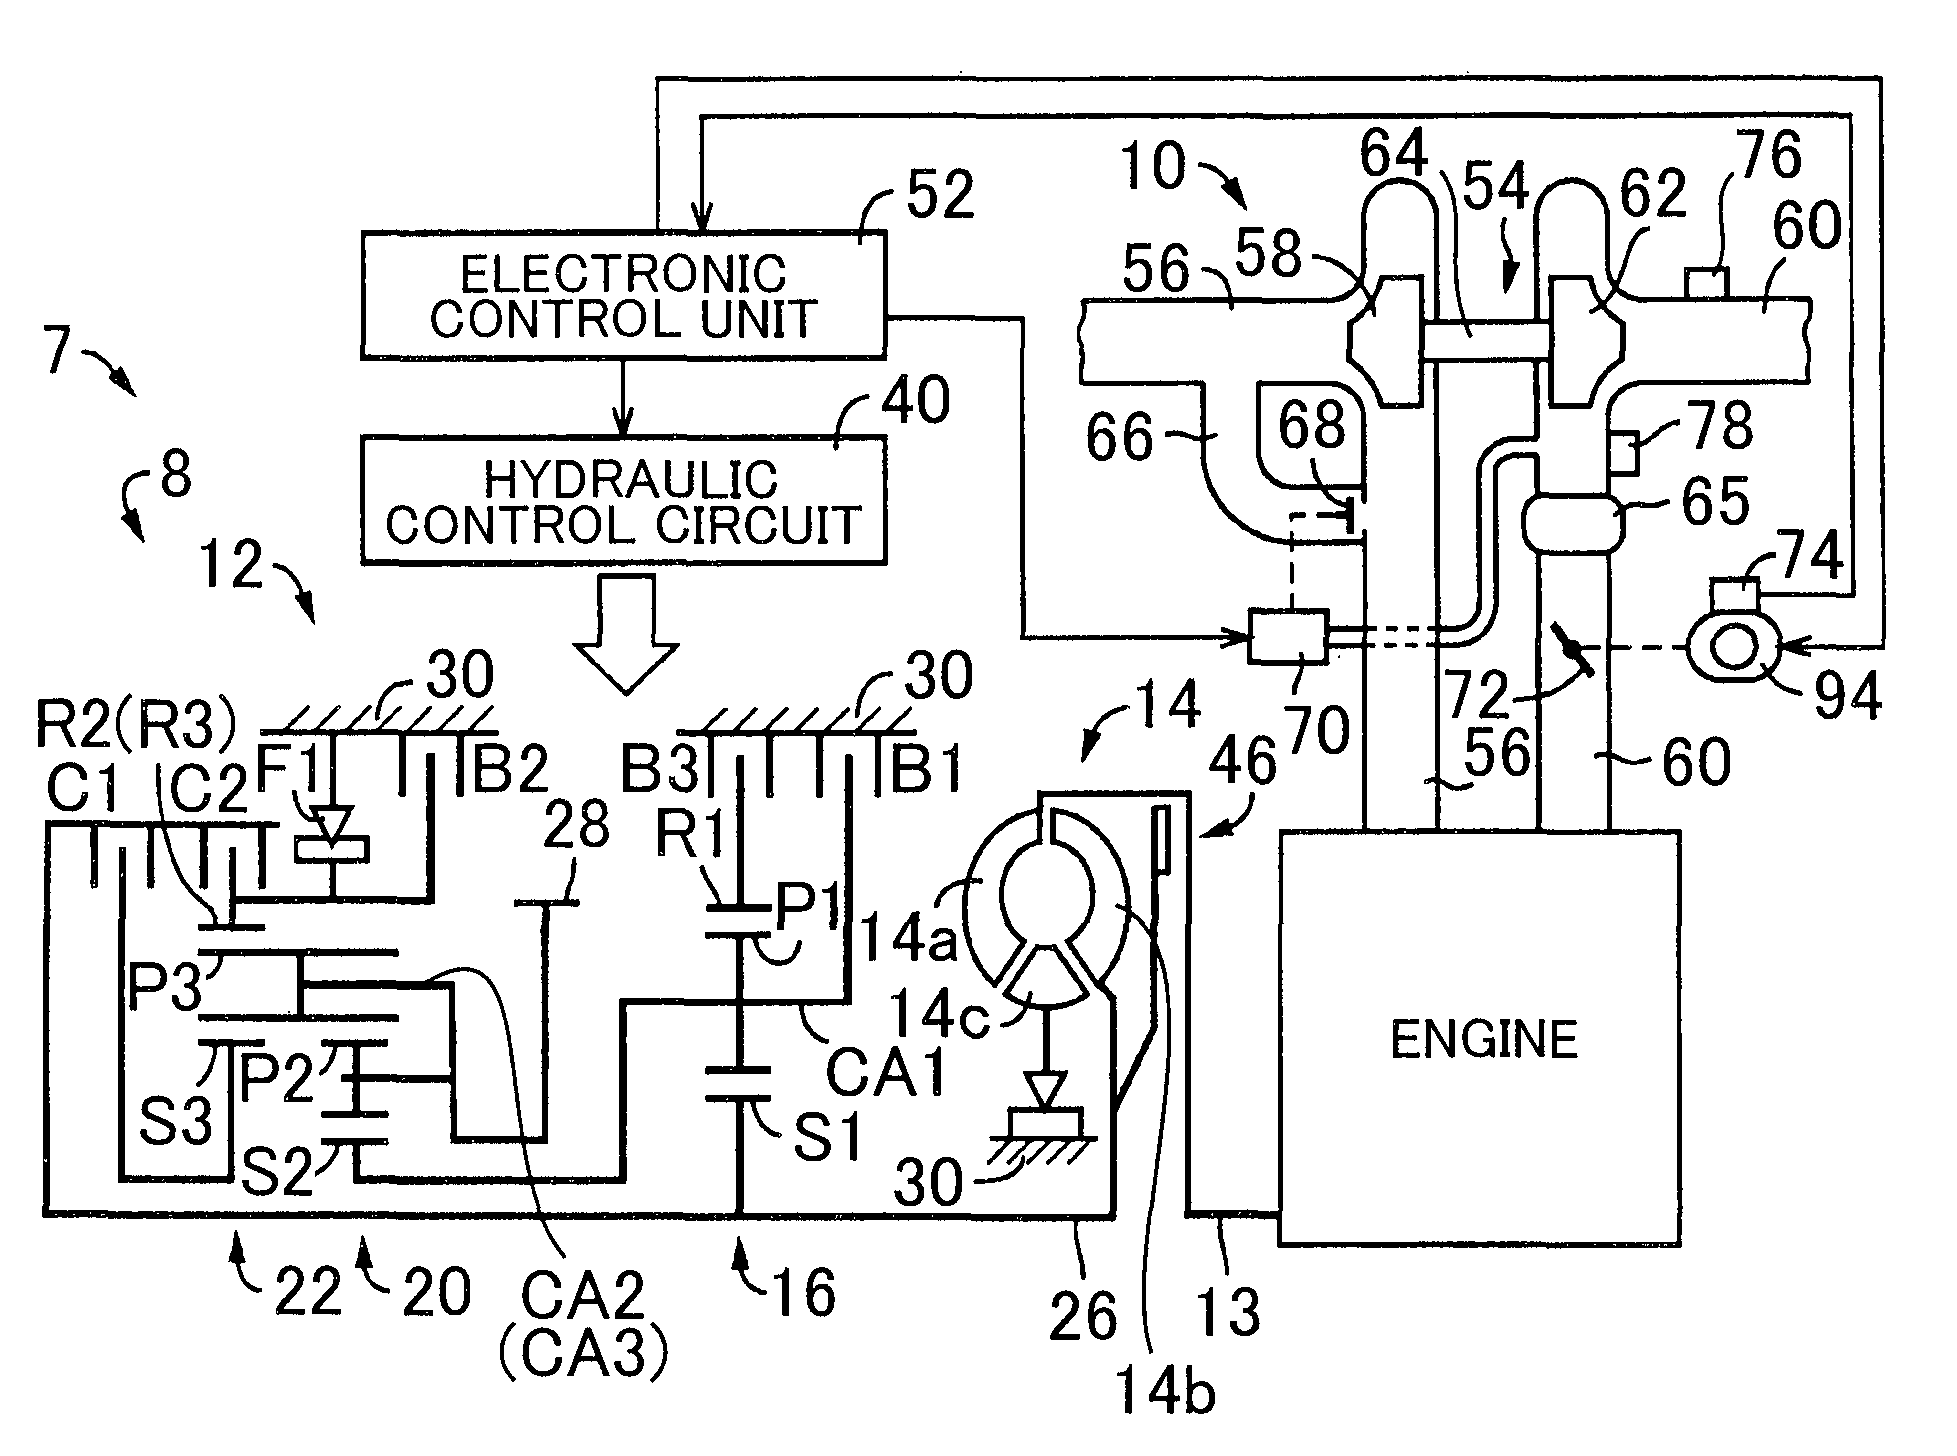 System to control the torque of an internal combustion engine during a gear change